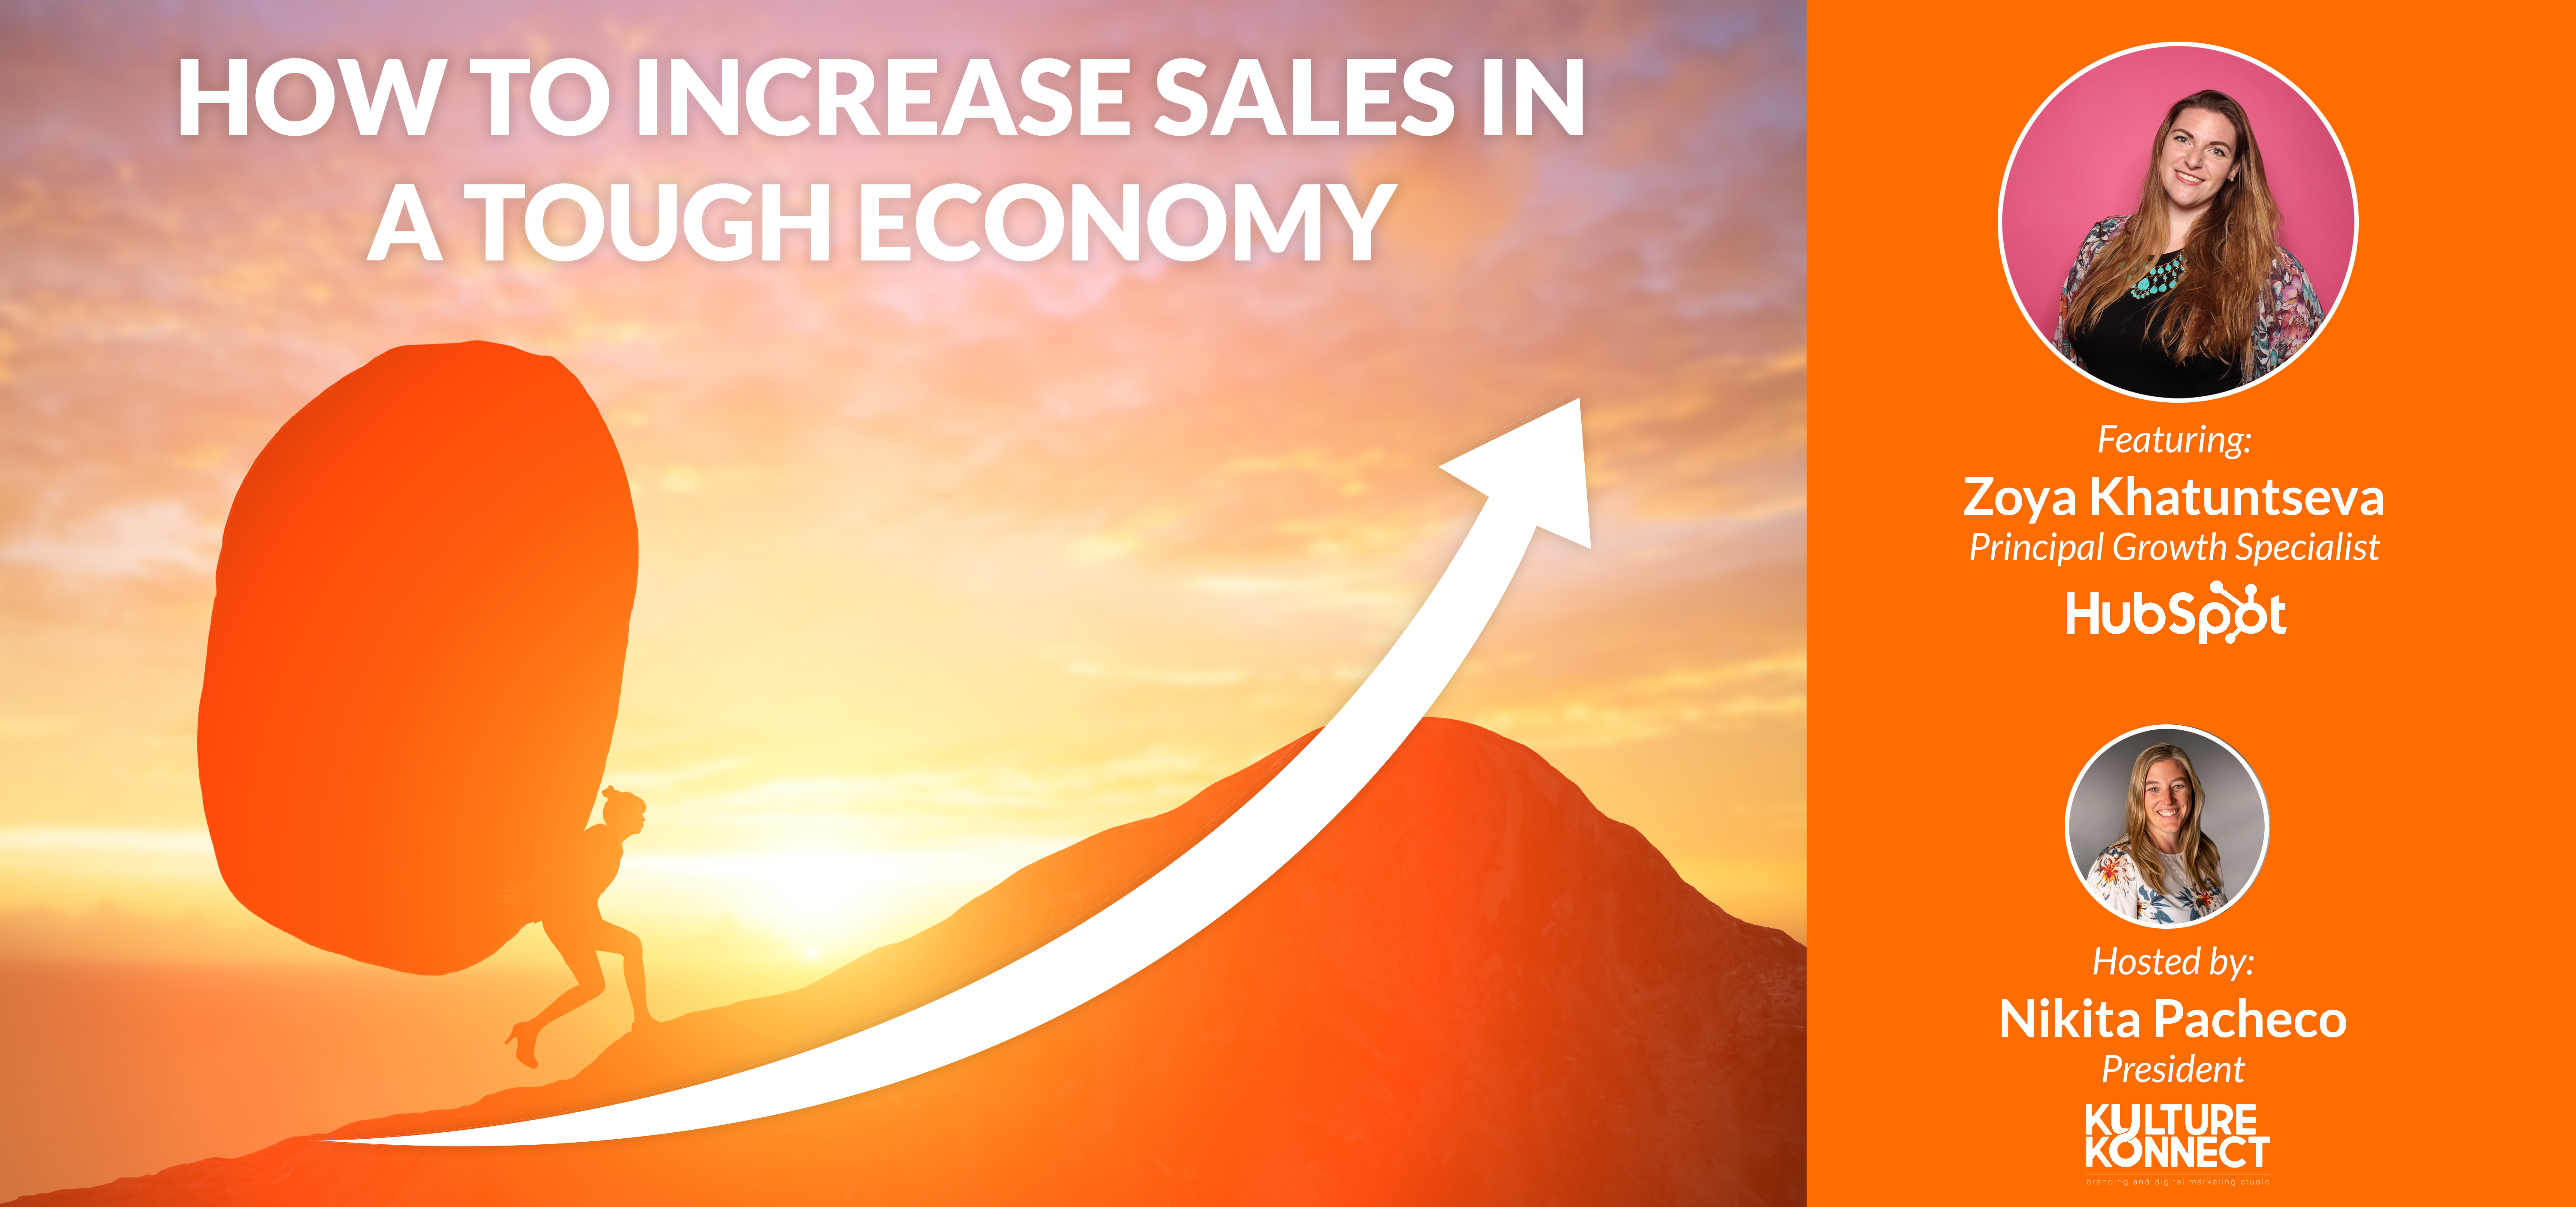 How To Increase Sales In A Tough Economy